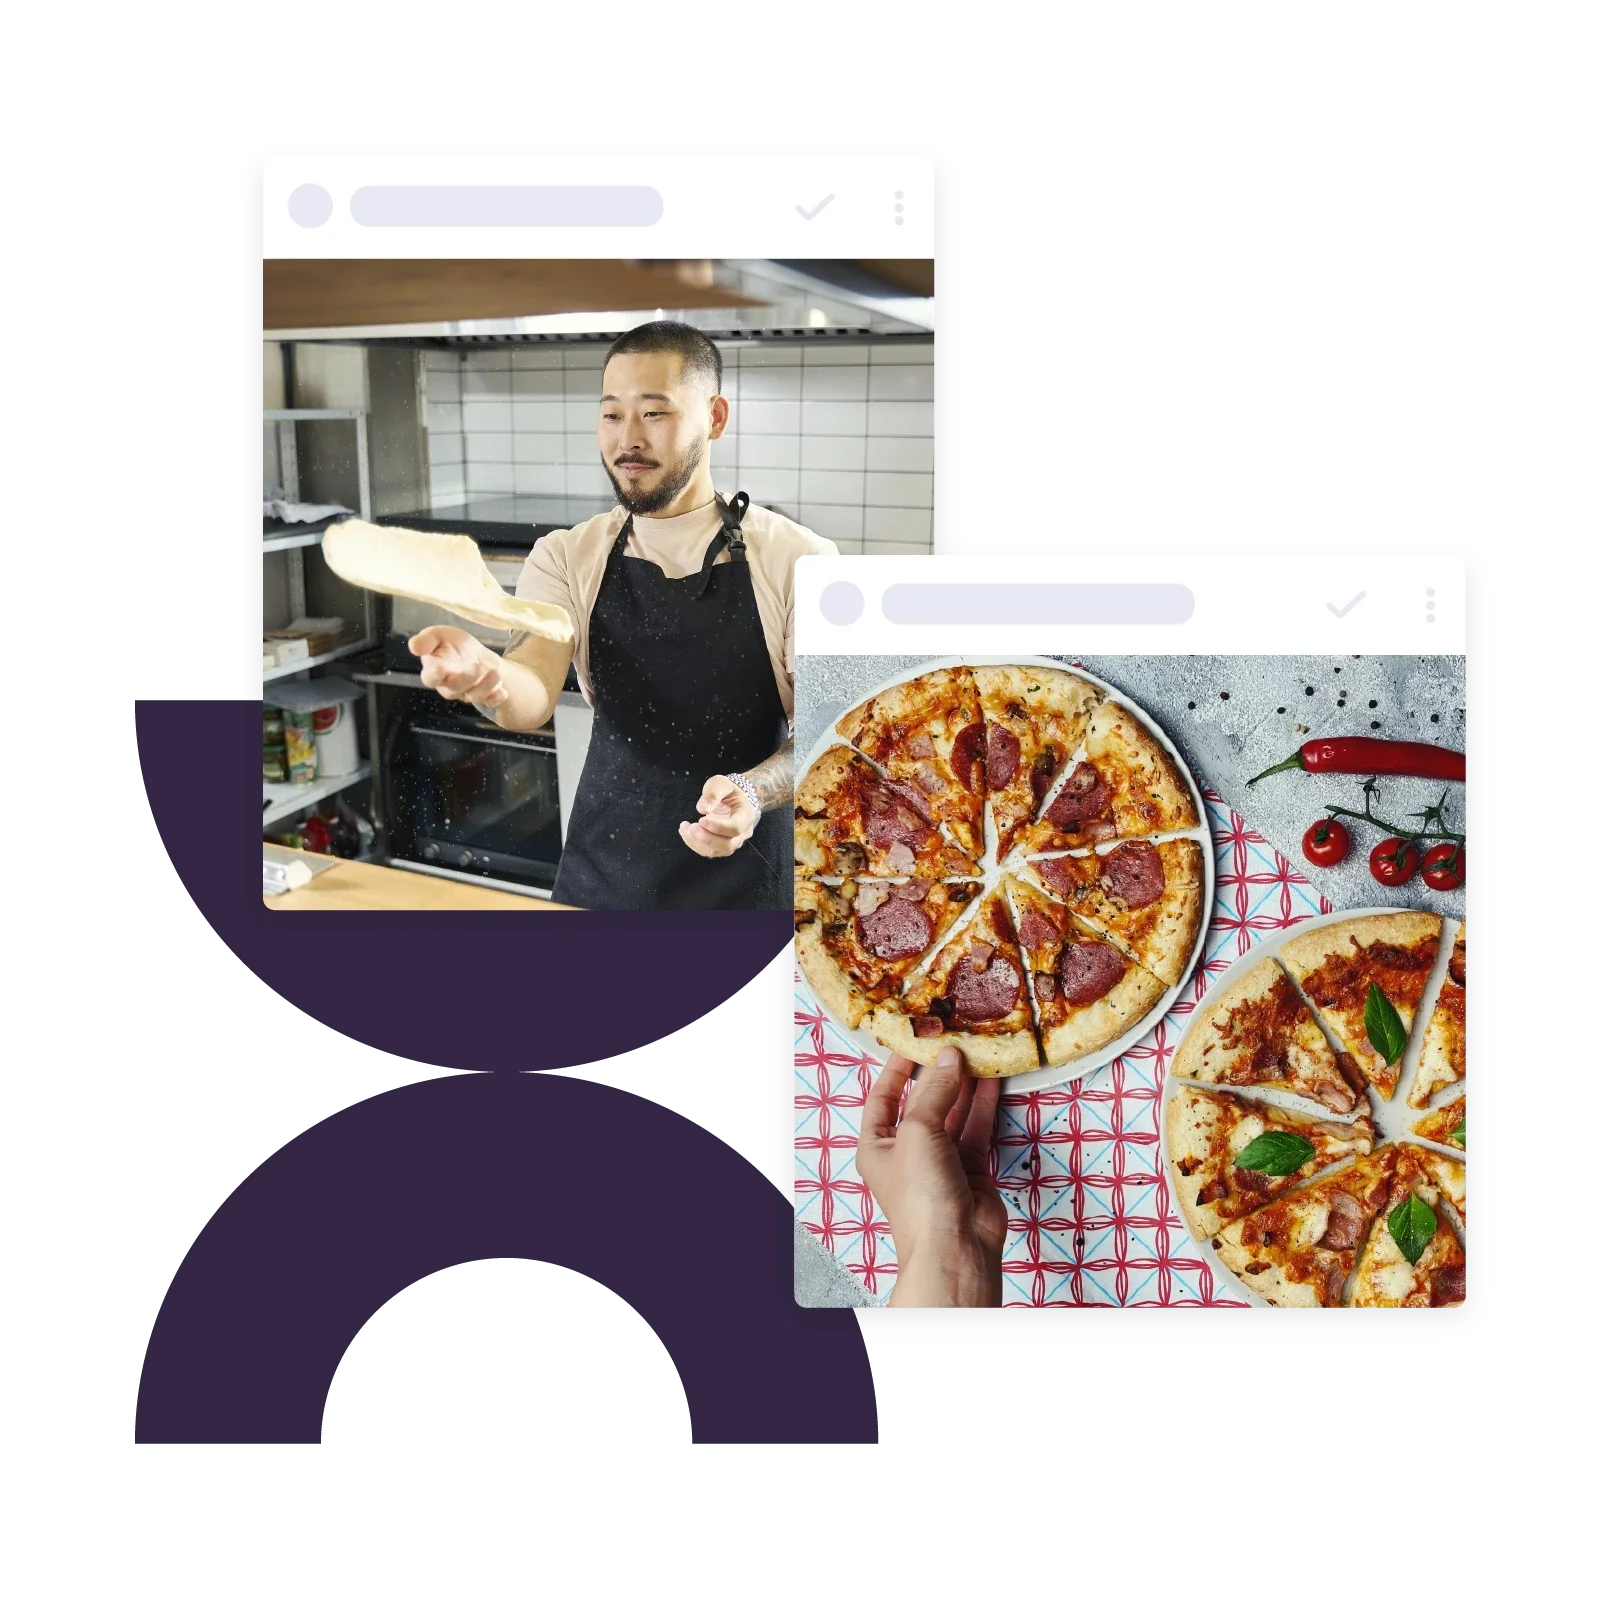 stylized social images of pizza and a man making pizza